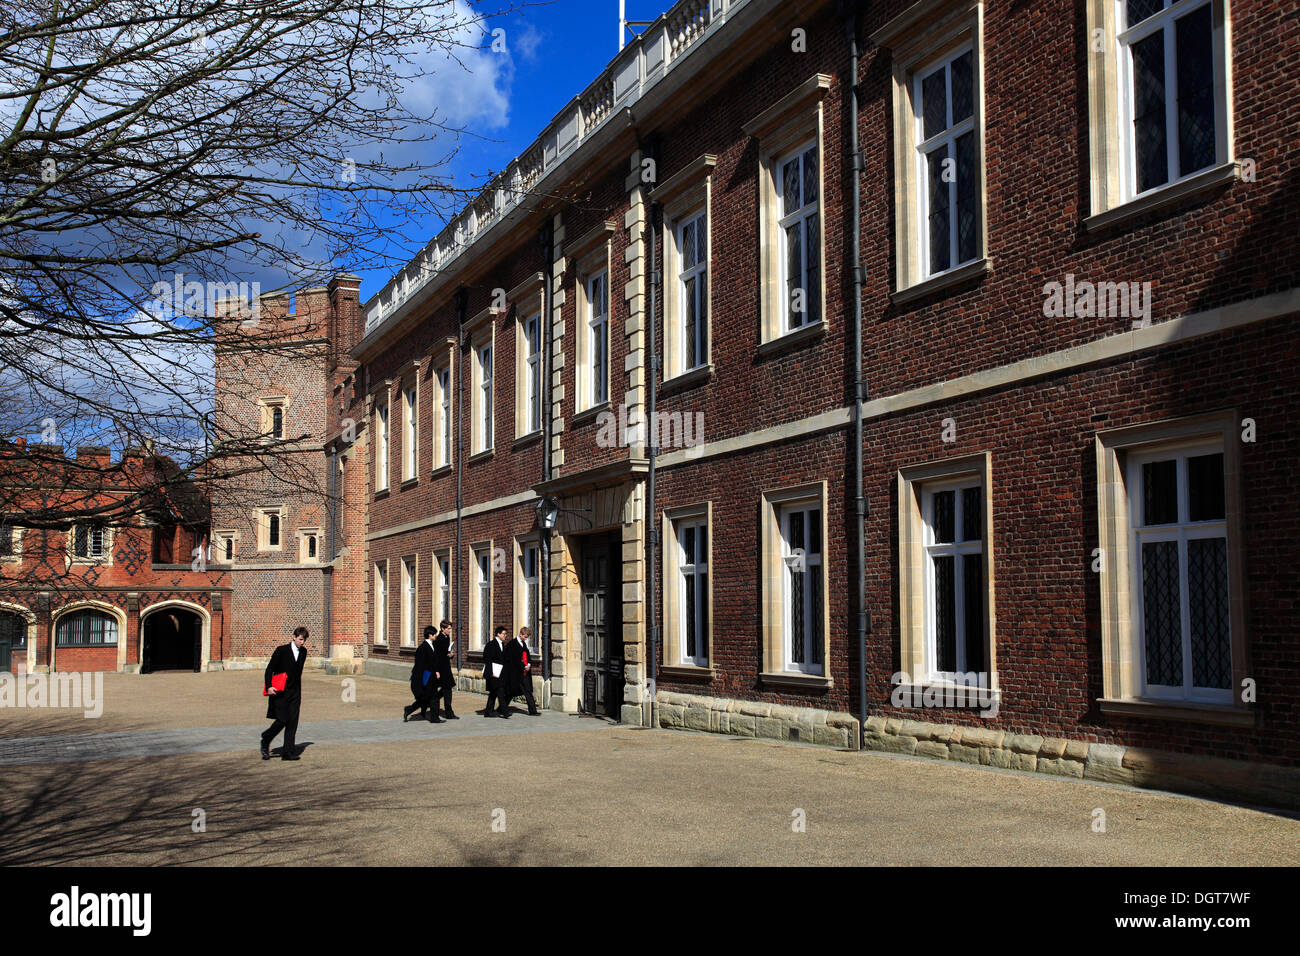 The facade of Eton College, Eton and Windsor towns, Berkshire County, England, Britain UK. Stock Photo